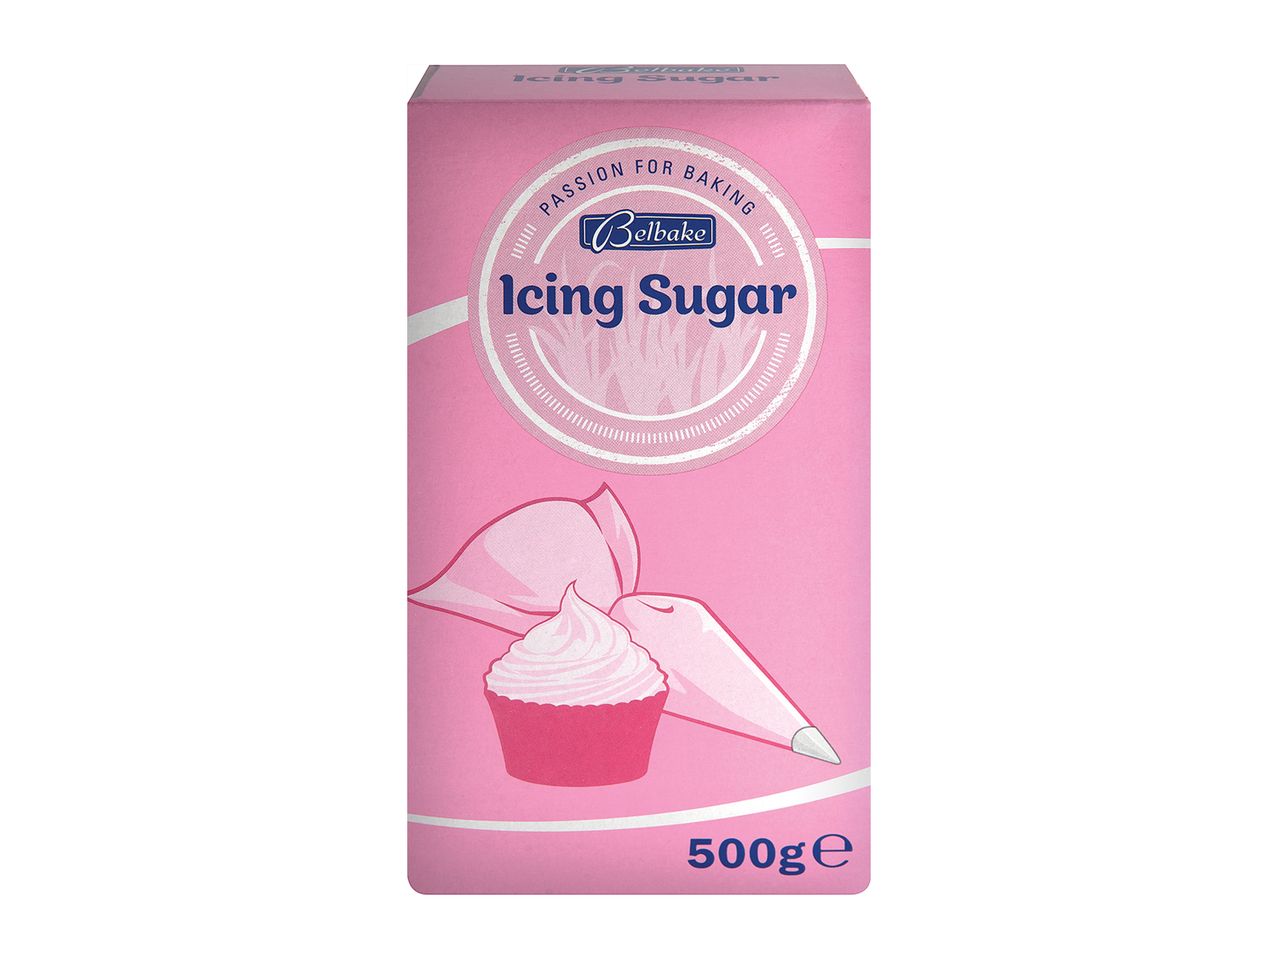 Go to full screen view: Belbake Icing Sugar - Image 1